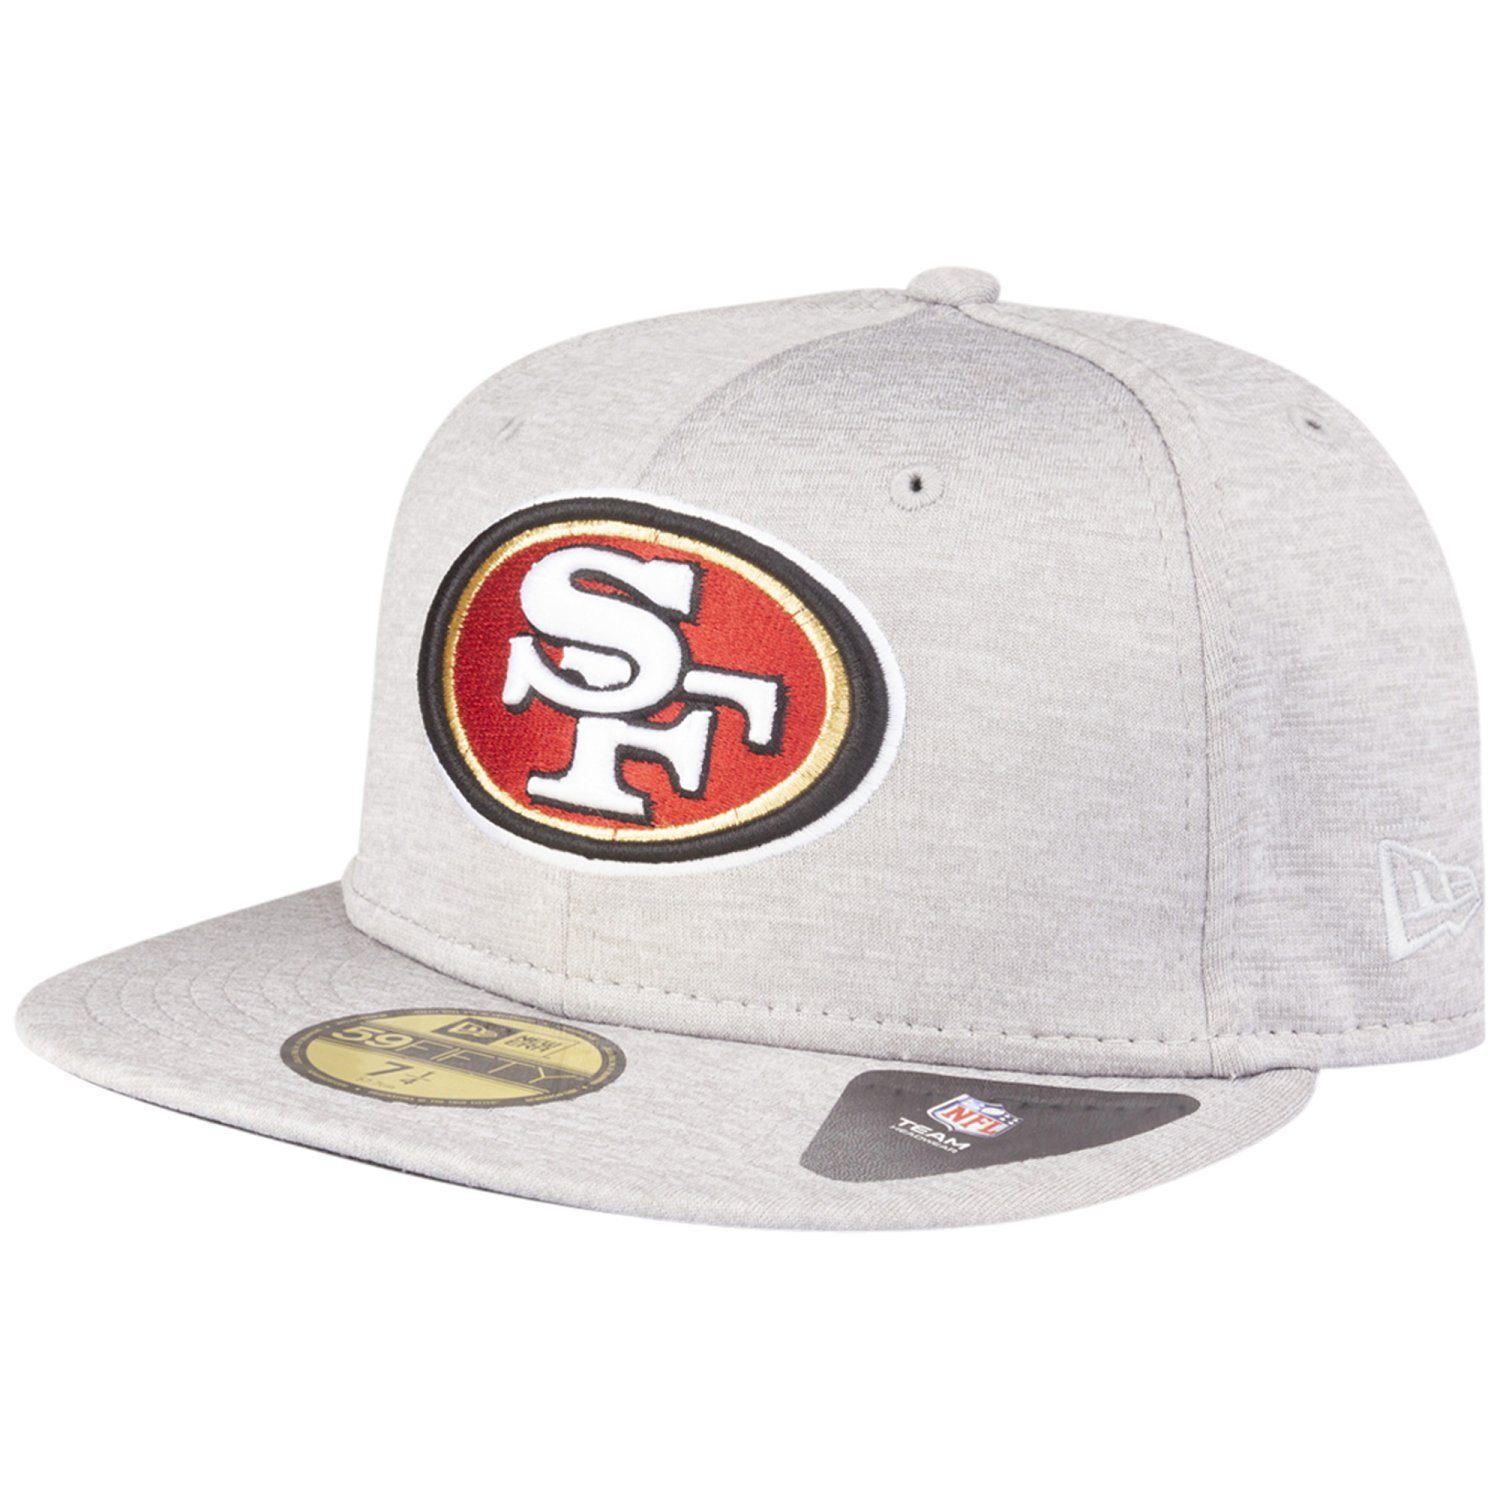 TECH San Fitted Francisco New 59Fifty 49ers SHADOW Cap Era